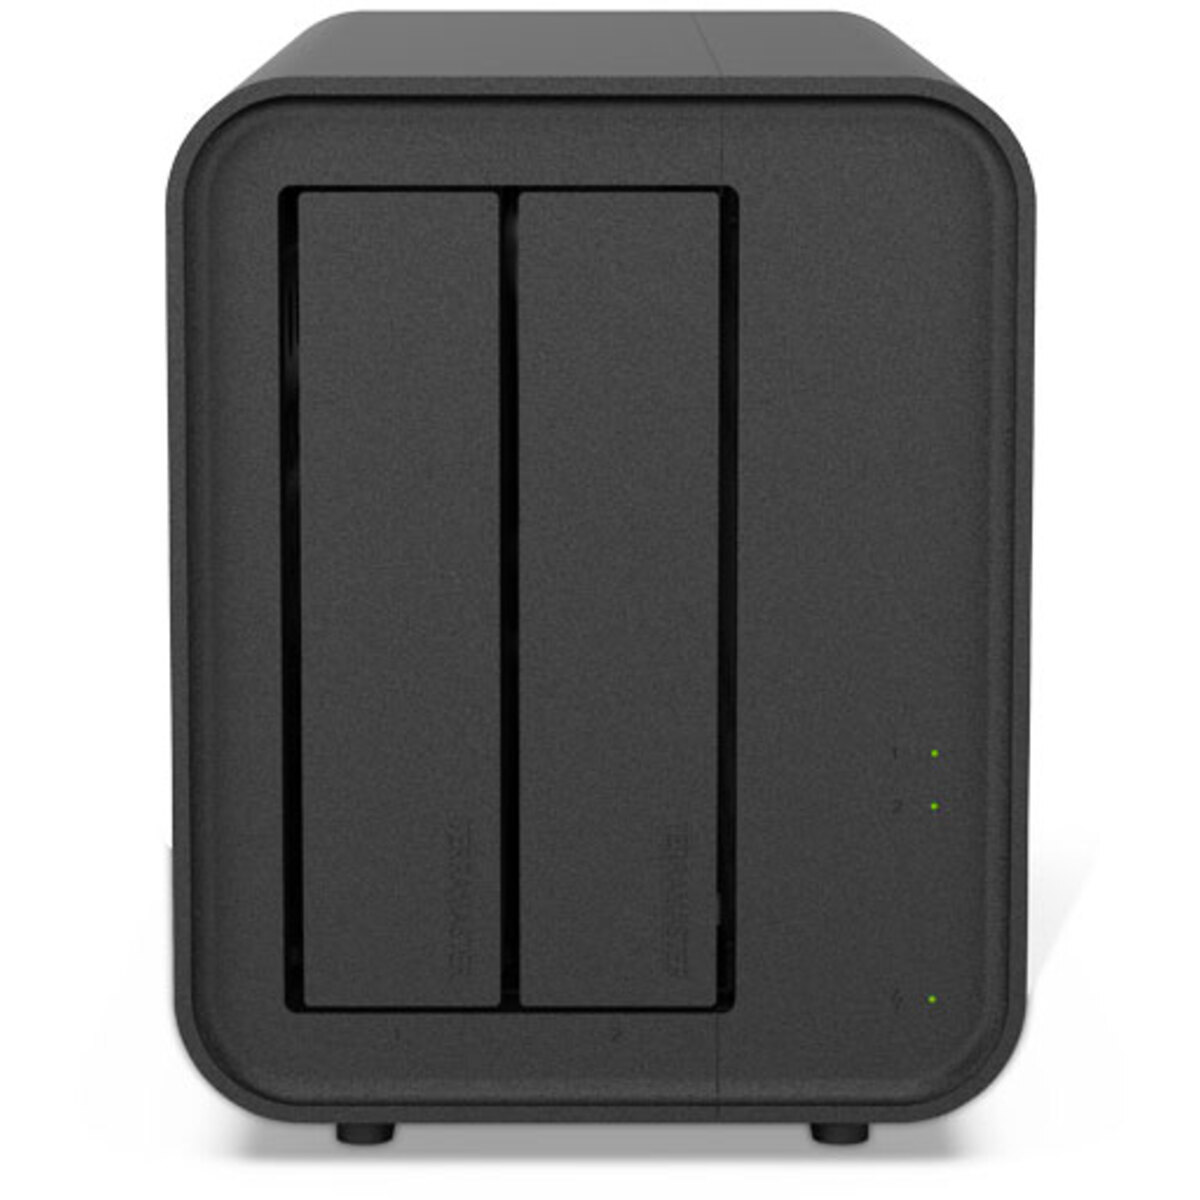 TerraMaster D5 Hybrid 8tb 2-Bay Desktop Multimedia / Power User / Business DAS - Direct Attached Storage Device 1x8tb TeamGroup EX2 Elite T253E2008T0C101 2.5 550/520MB/s SATA 6Gb/s SSD CONSUMER Class Drives Installed - Burn-In Tested D5 Hybrid